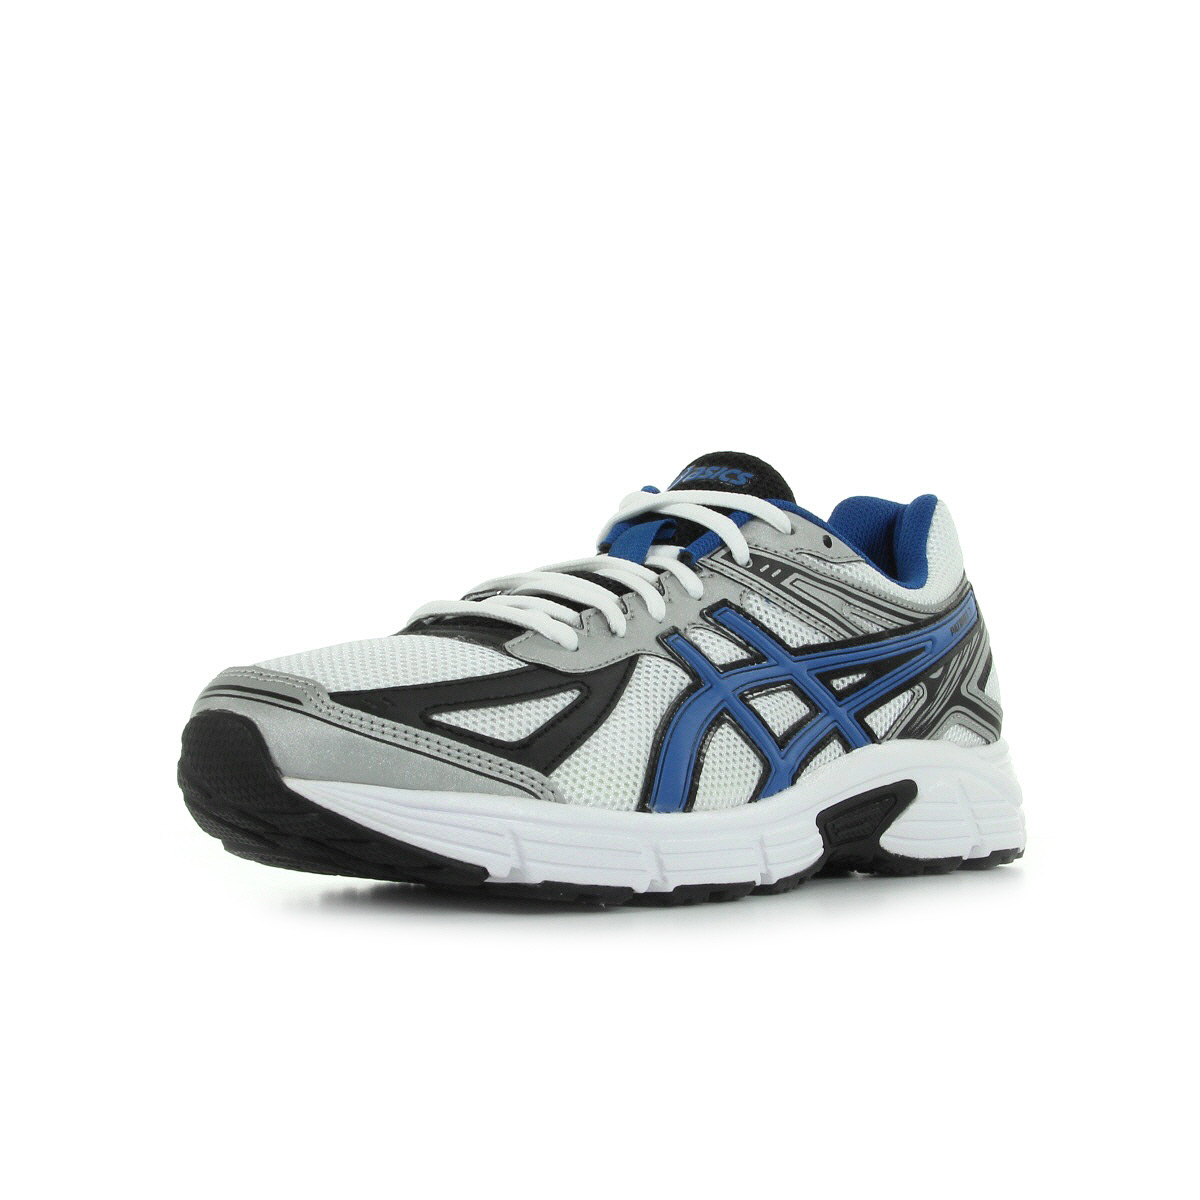 Chaussures Running Asics Homme Patriot 7 Athlétisme Course Taille